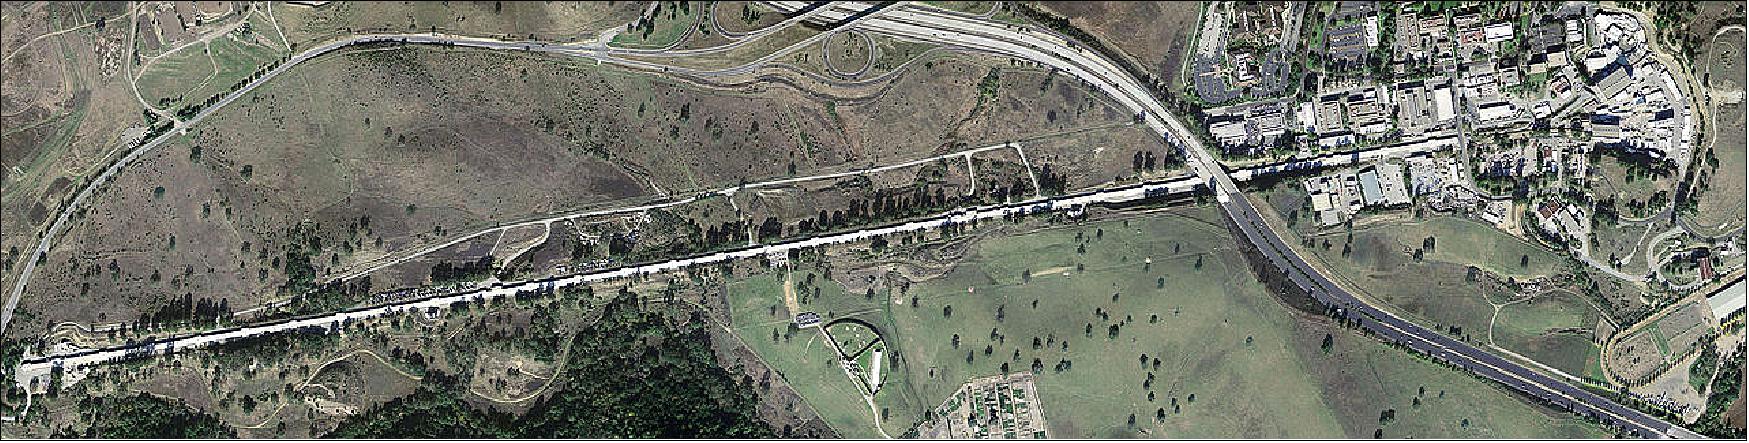 Figure 46: Aerial photo showing the 2 mile length of SLAC, as it is the largest linear accelerator in the world (image credit: Stanford University)